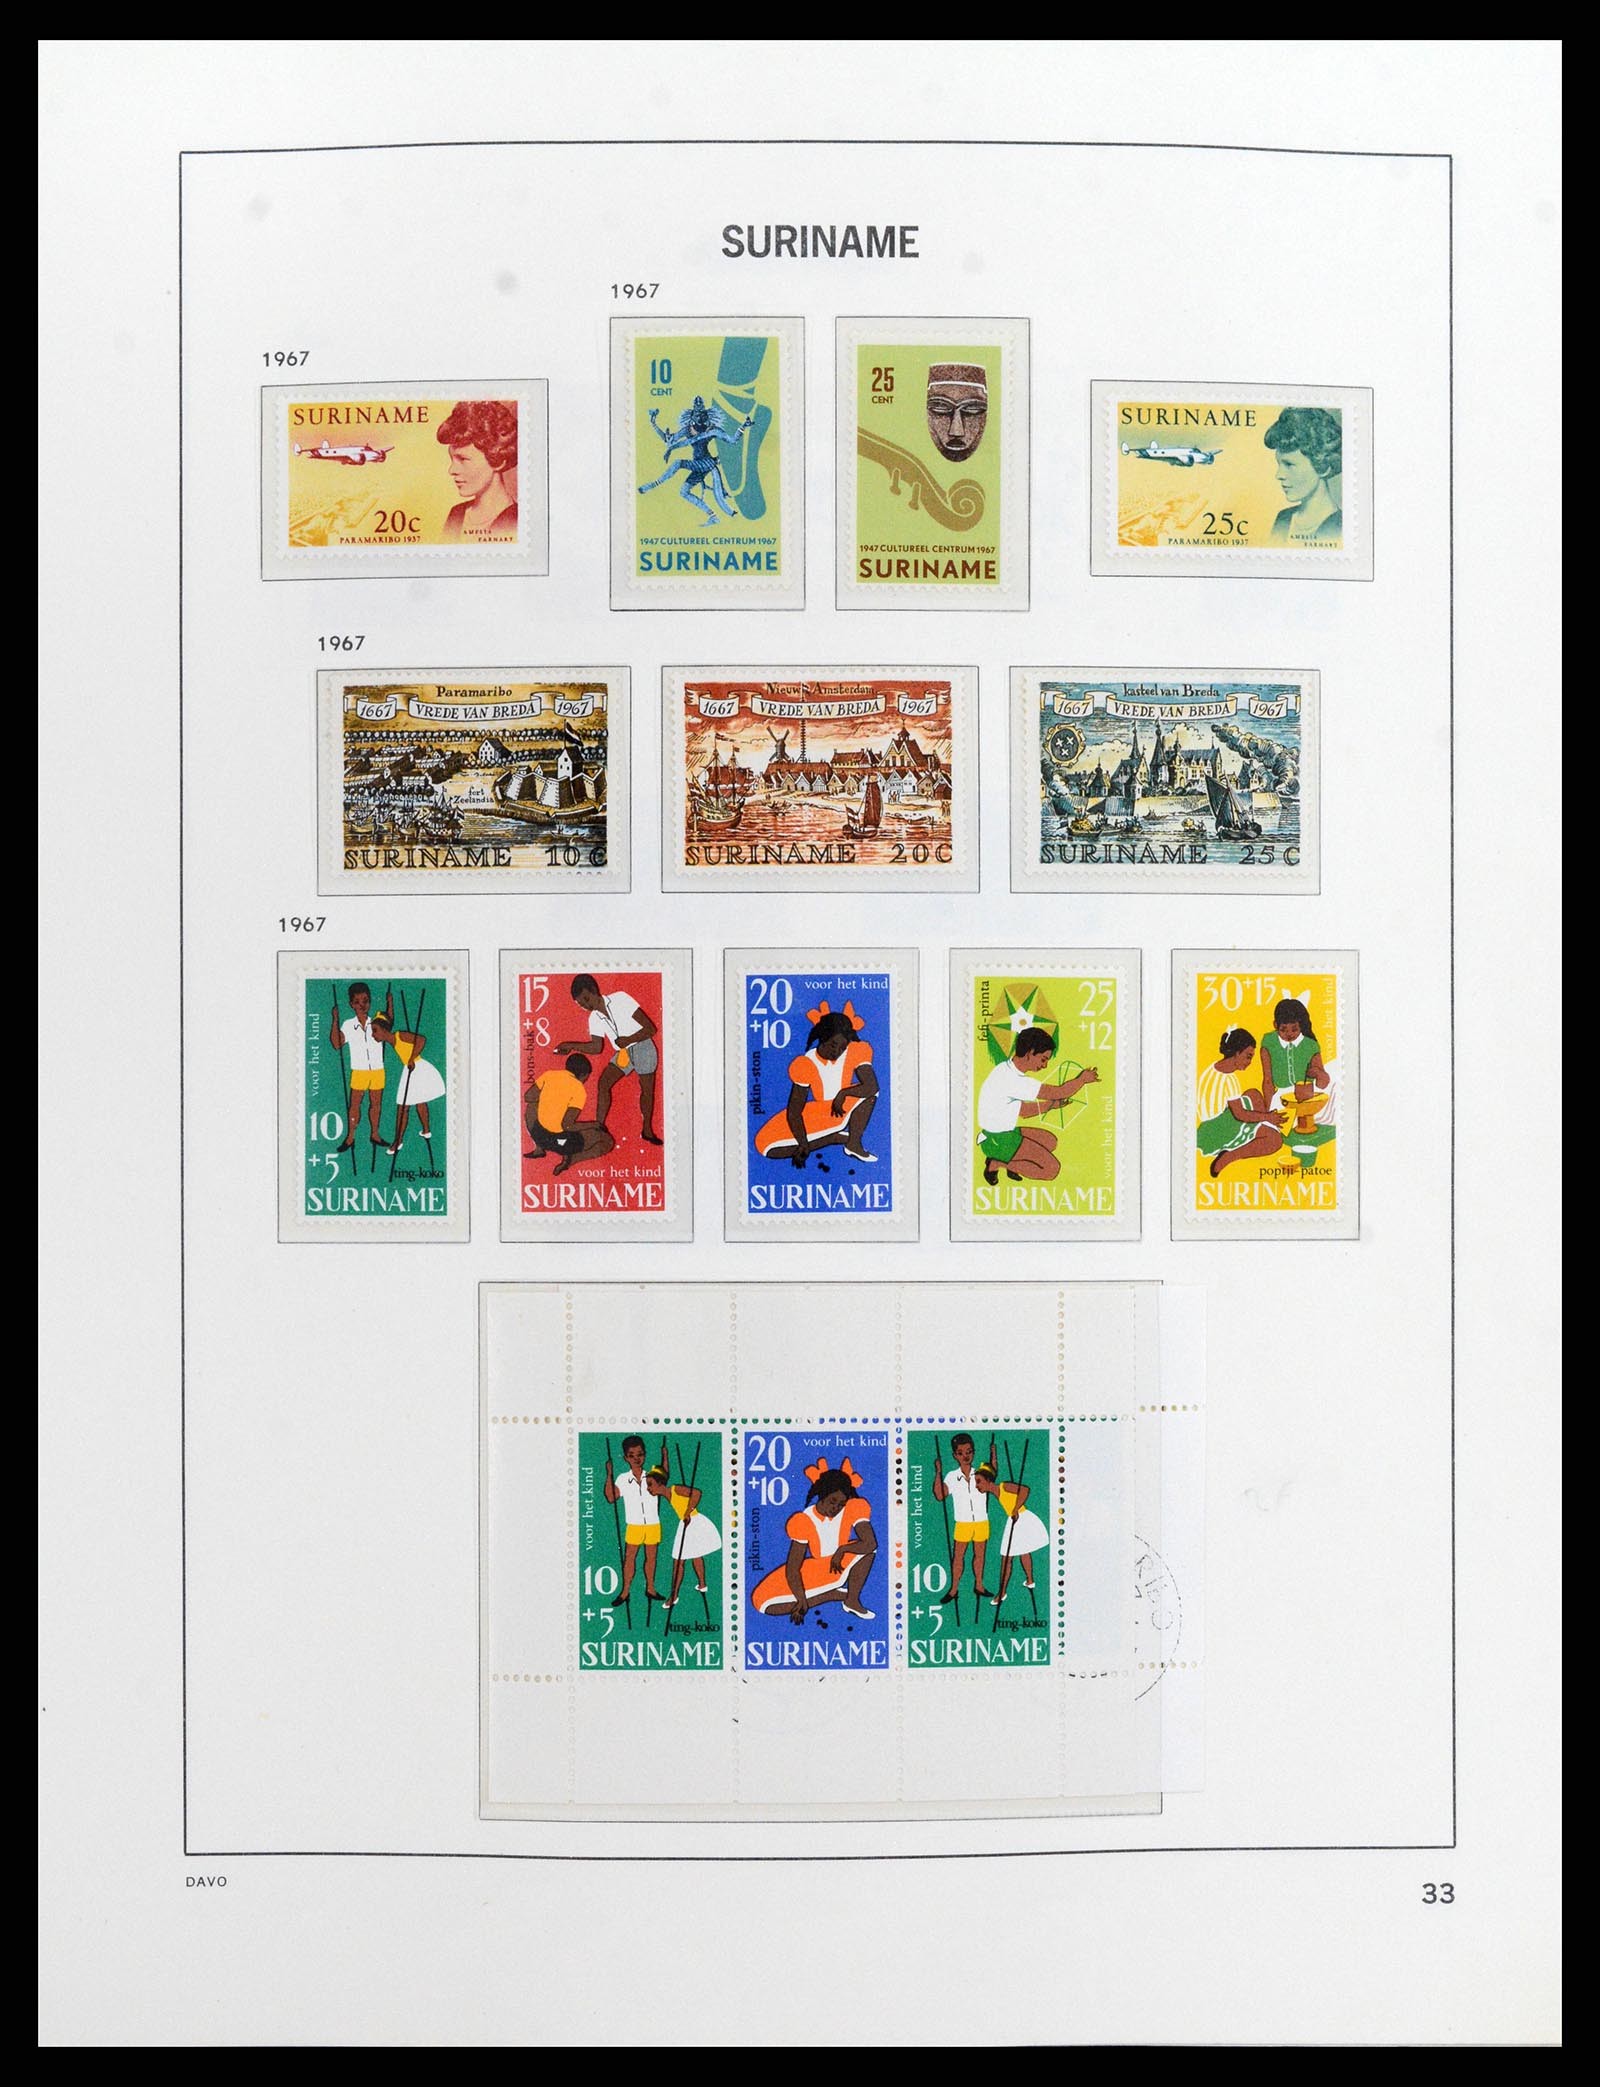 37843 037 - Stamp Collection 37843 Suriname 1873-2008.